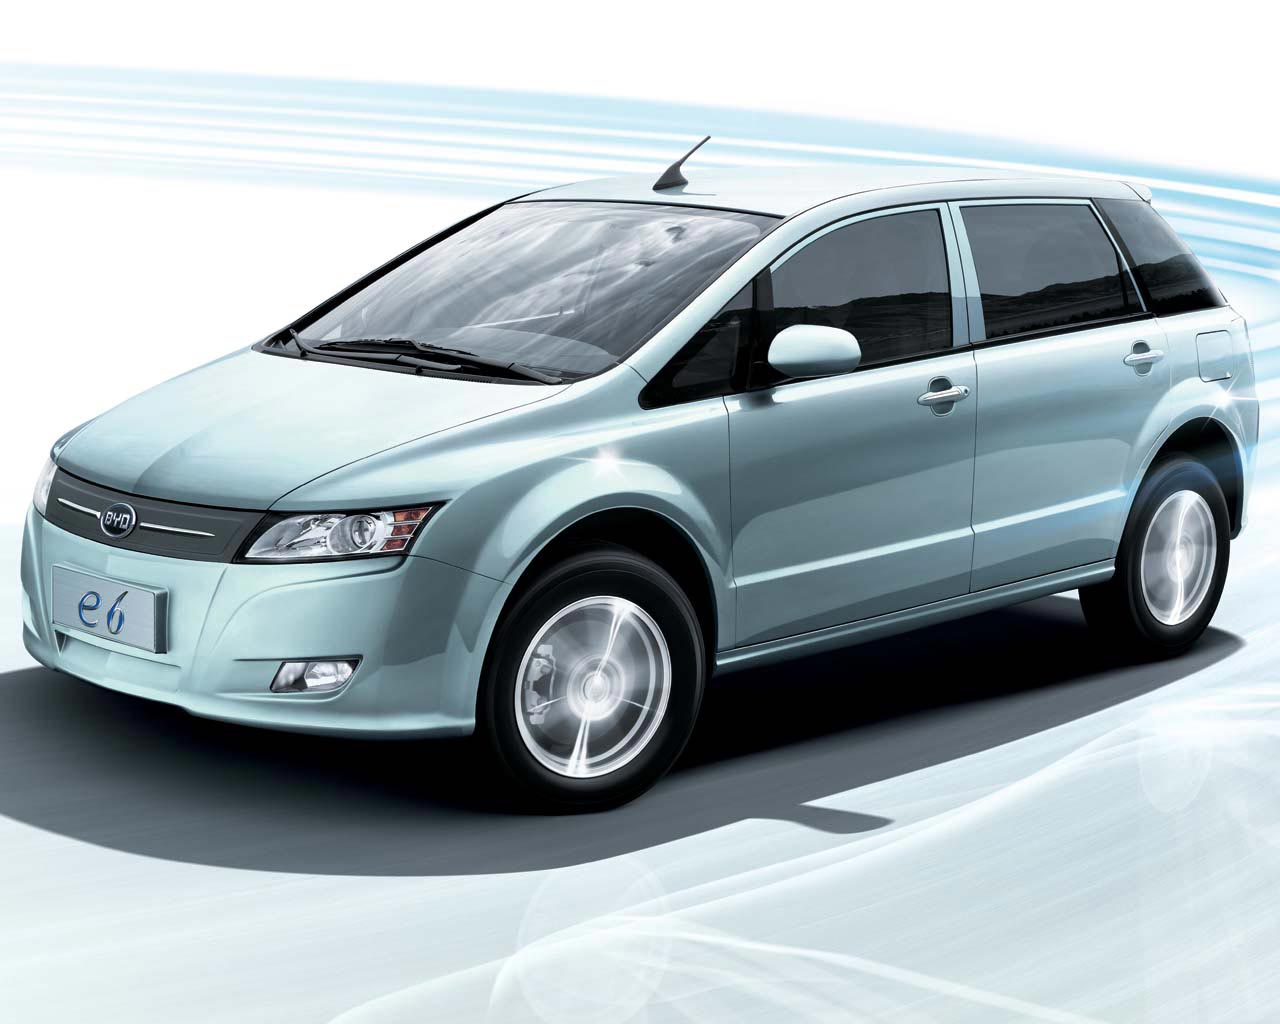 byd e6 electric vehicle now available